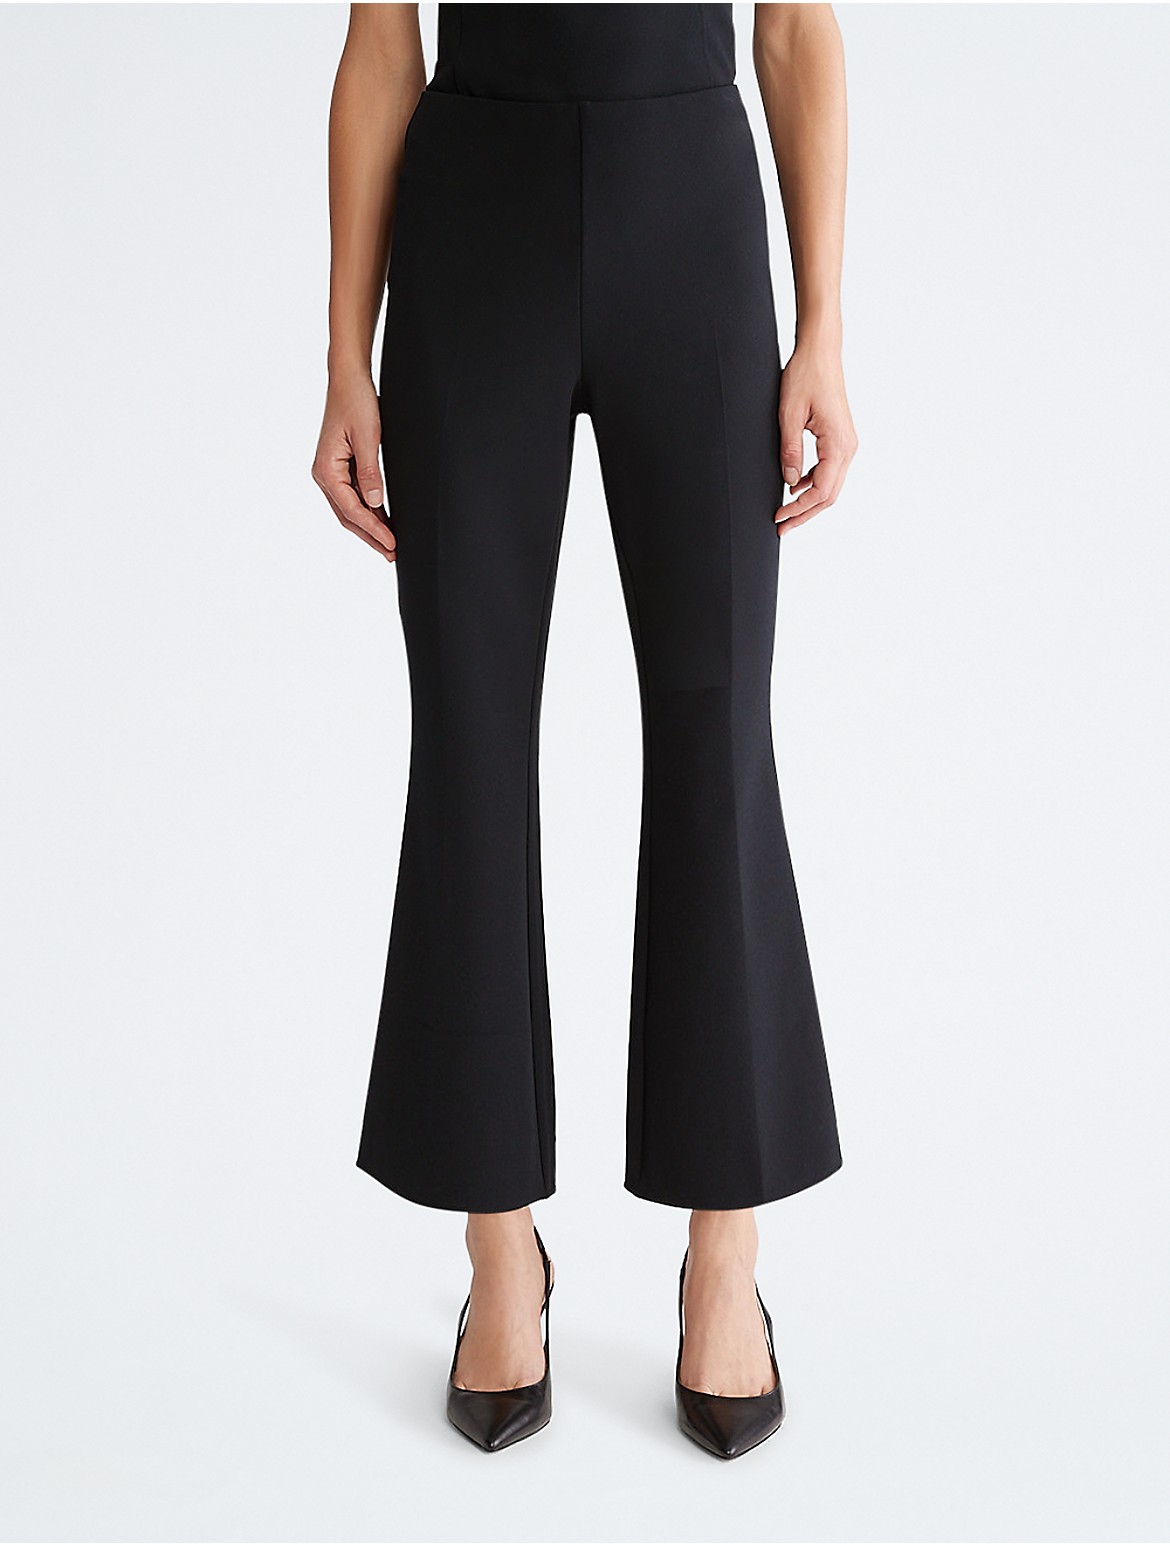 Calvin Klein Women's Compact Stretch Crepe Flared Pants - Black - XS